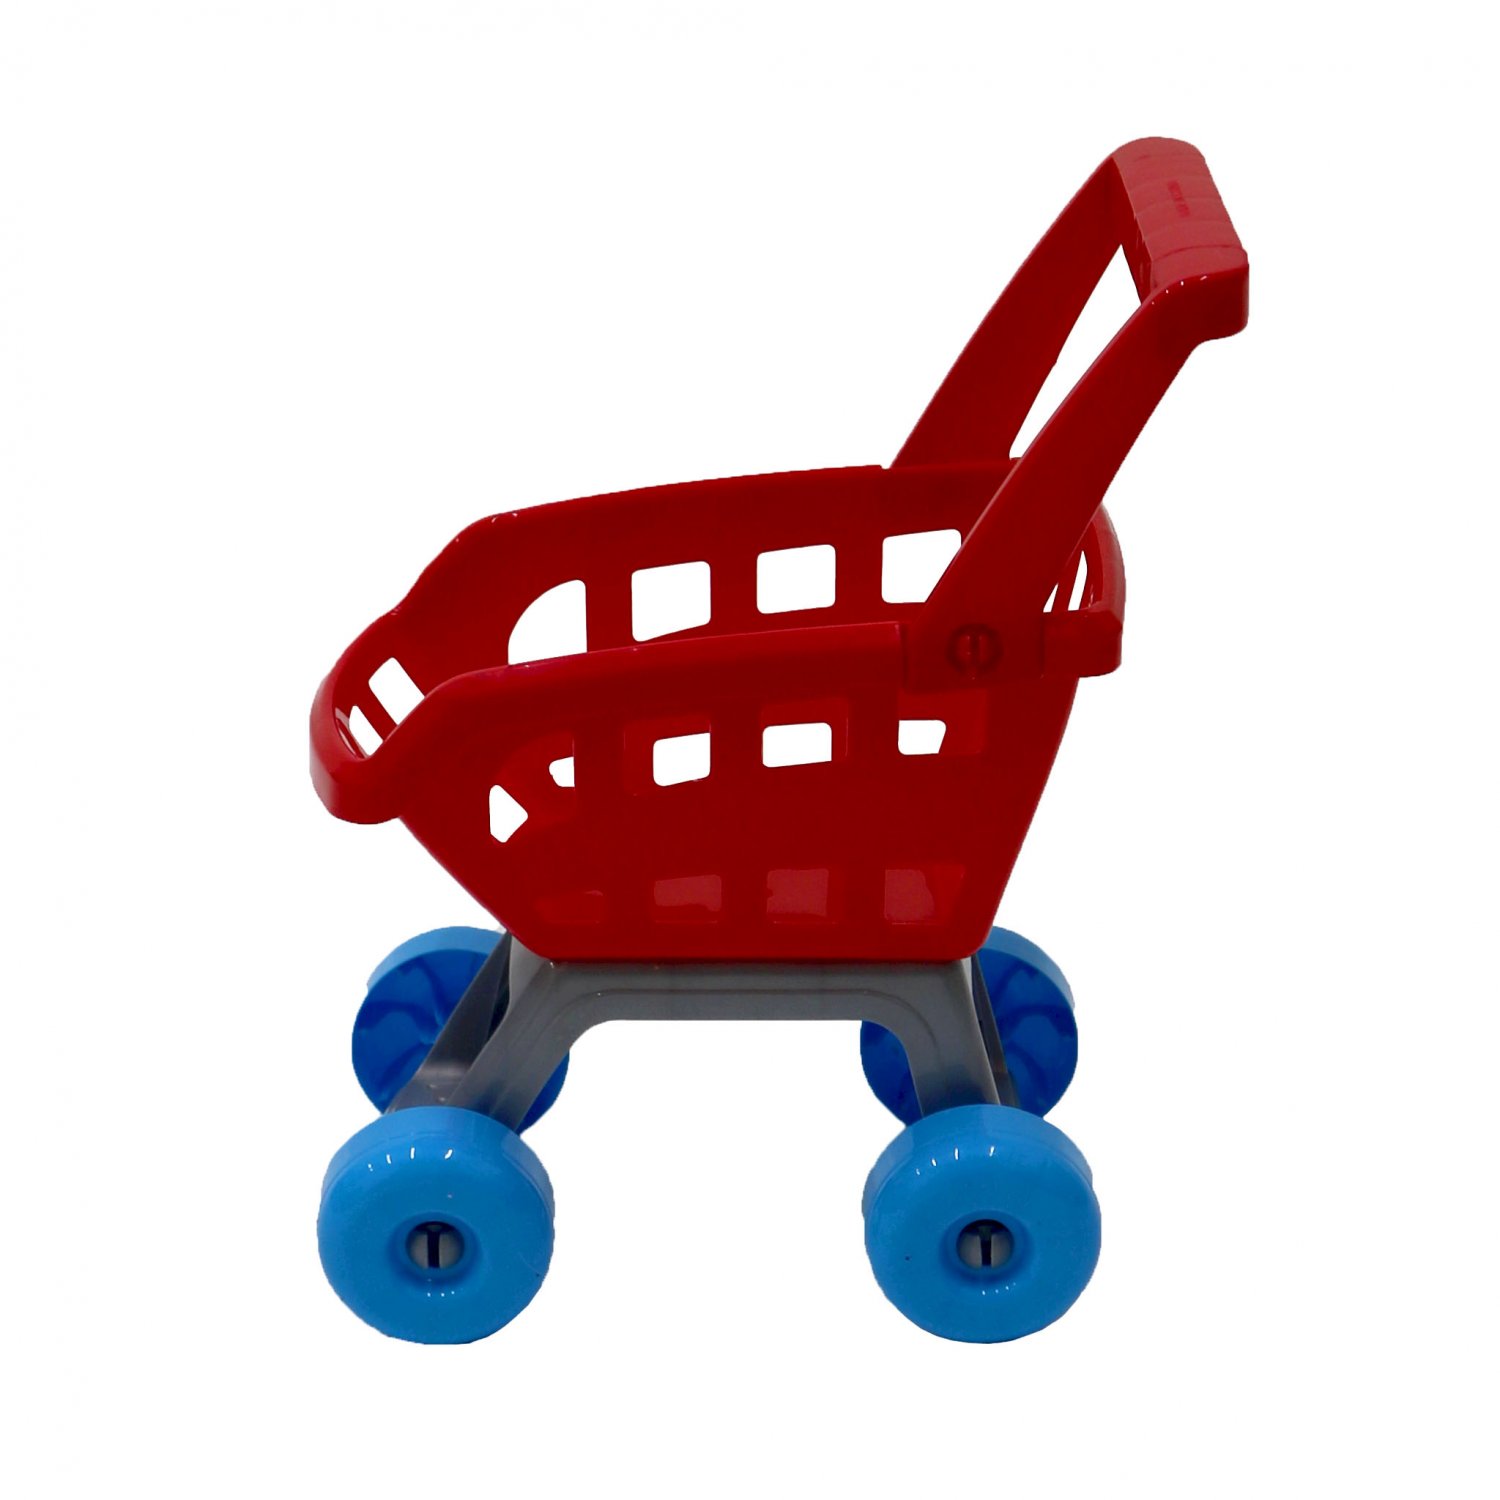 Details about   KIDS SHOPPING TROLLEY CHILDREN'S ROLE PLAY SUPERMARKET SET WITH FOOD ACCESSORIES 